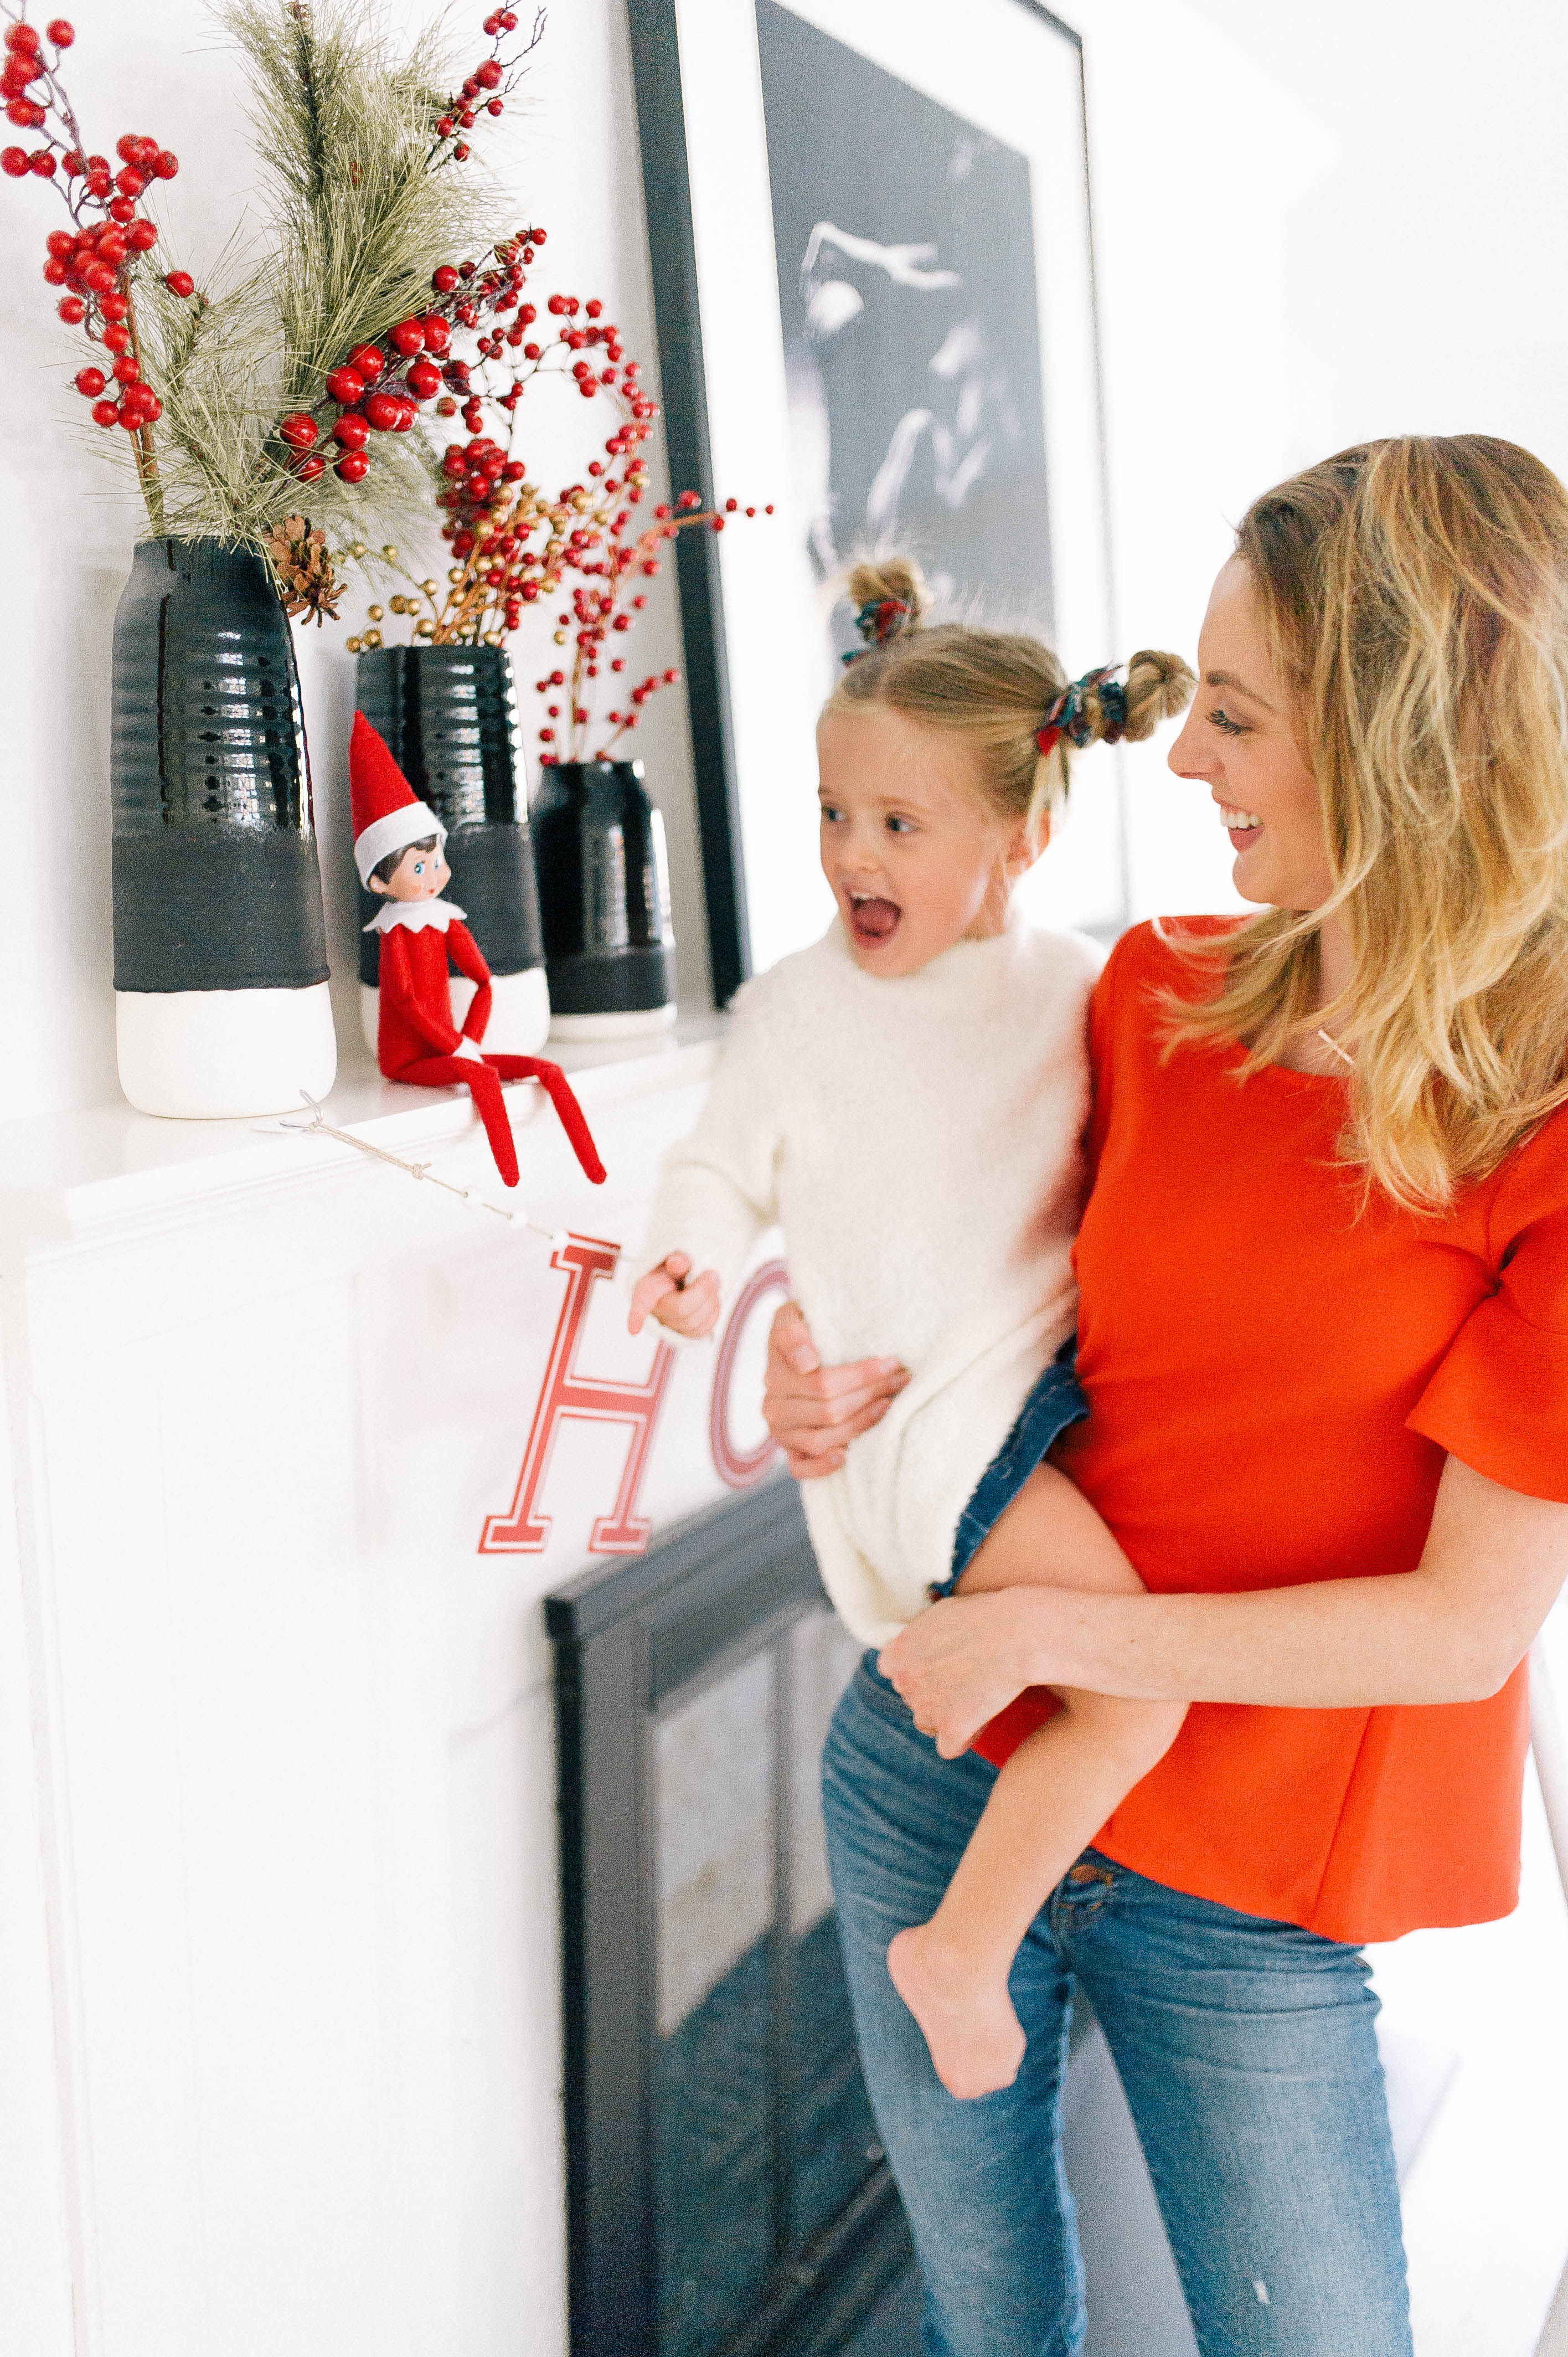 Eva Amurri introduces the Elf On The Shelf tradition to her kids